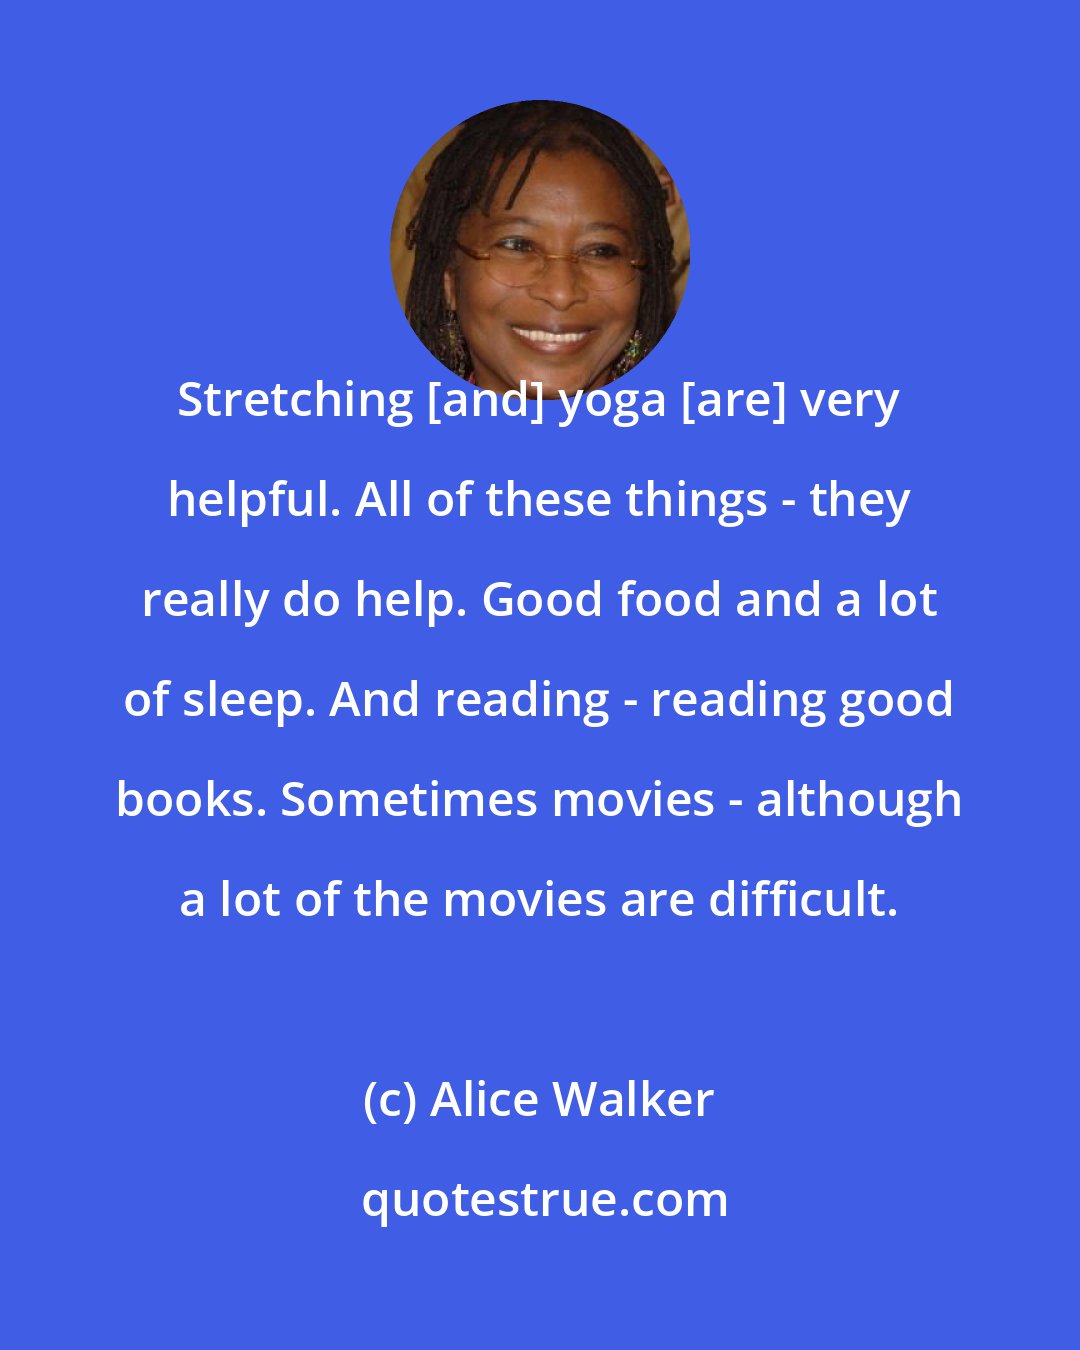 Alice Walker: Stretching [and] yoga [are] very helpful. All of these things - they really do help. Good food and a lot of sleep. And reading - reading good books. Sometimes movies - although a lot of the movies are difficult.